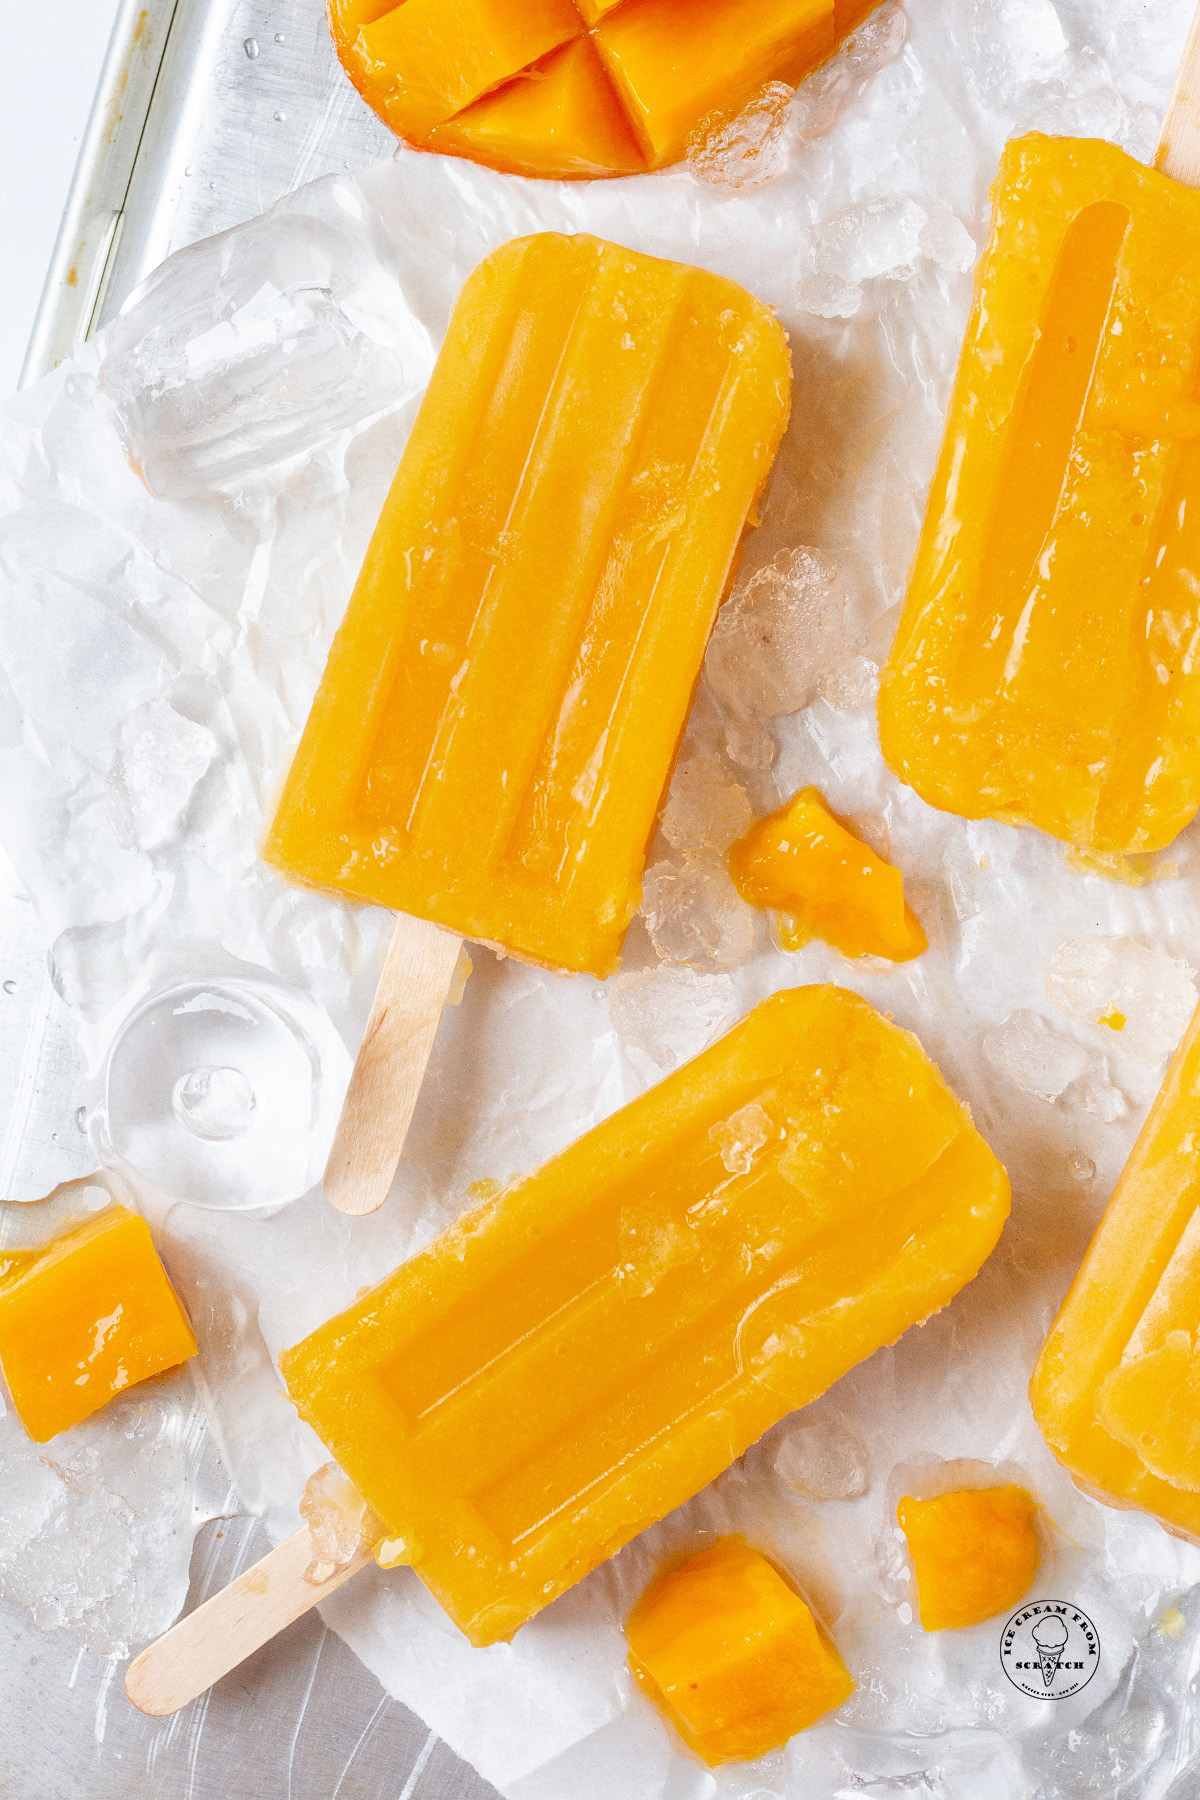 Four mango popsicles on a tray of ice. Small chunks of mango are next to them.